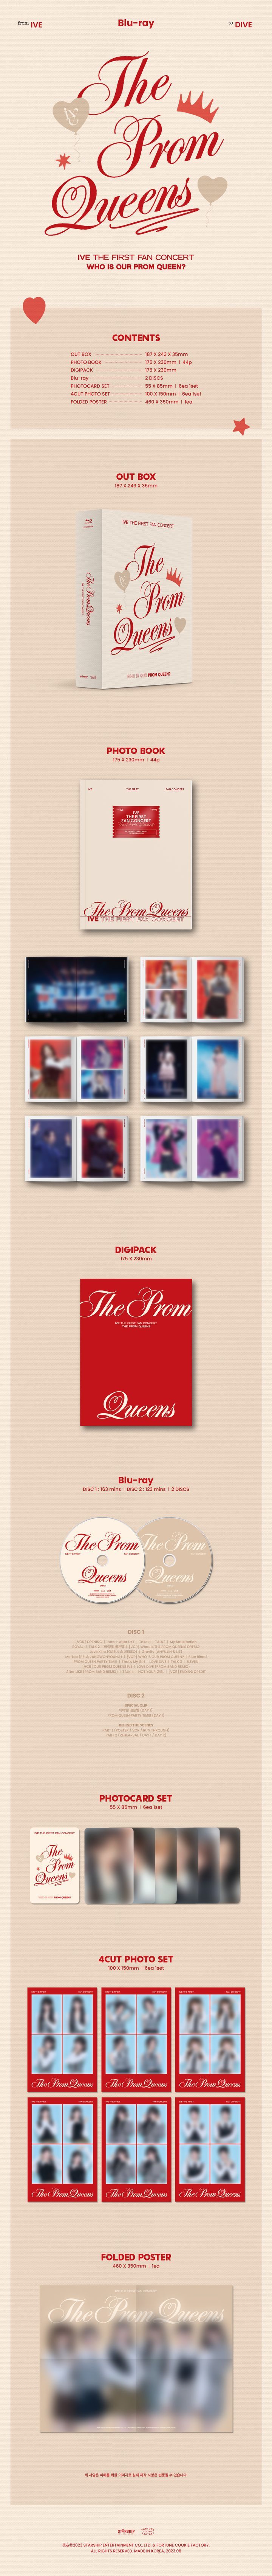 YESASIA: IVE - THE FIRST FAN CONCERT 'The Prom Queens' (Blu